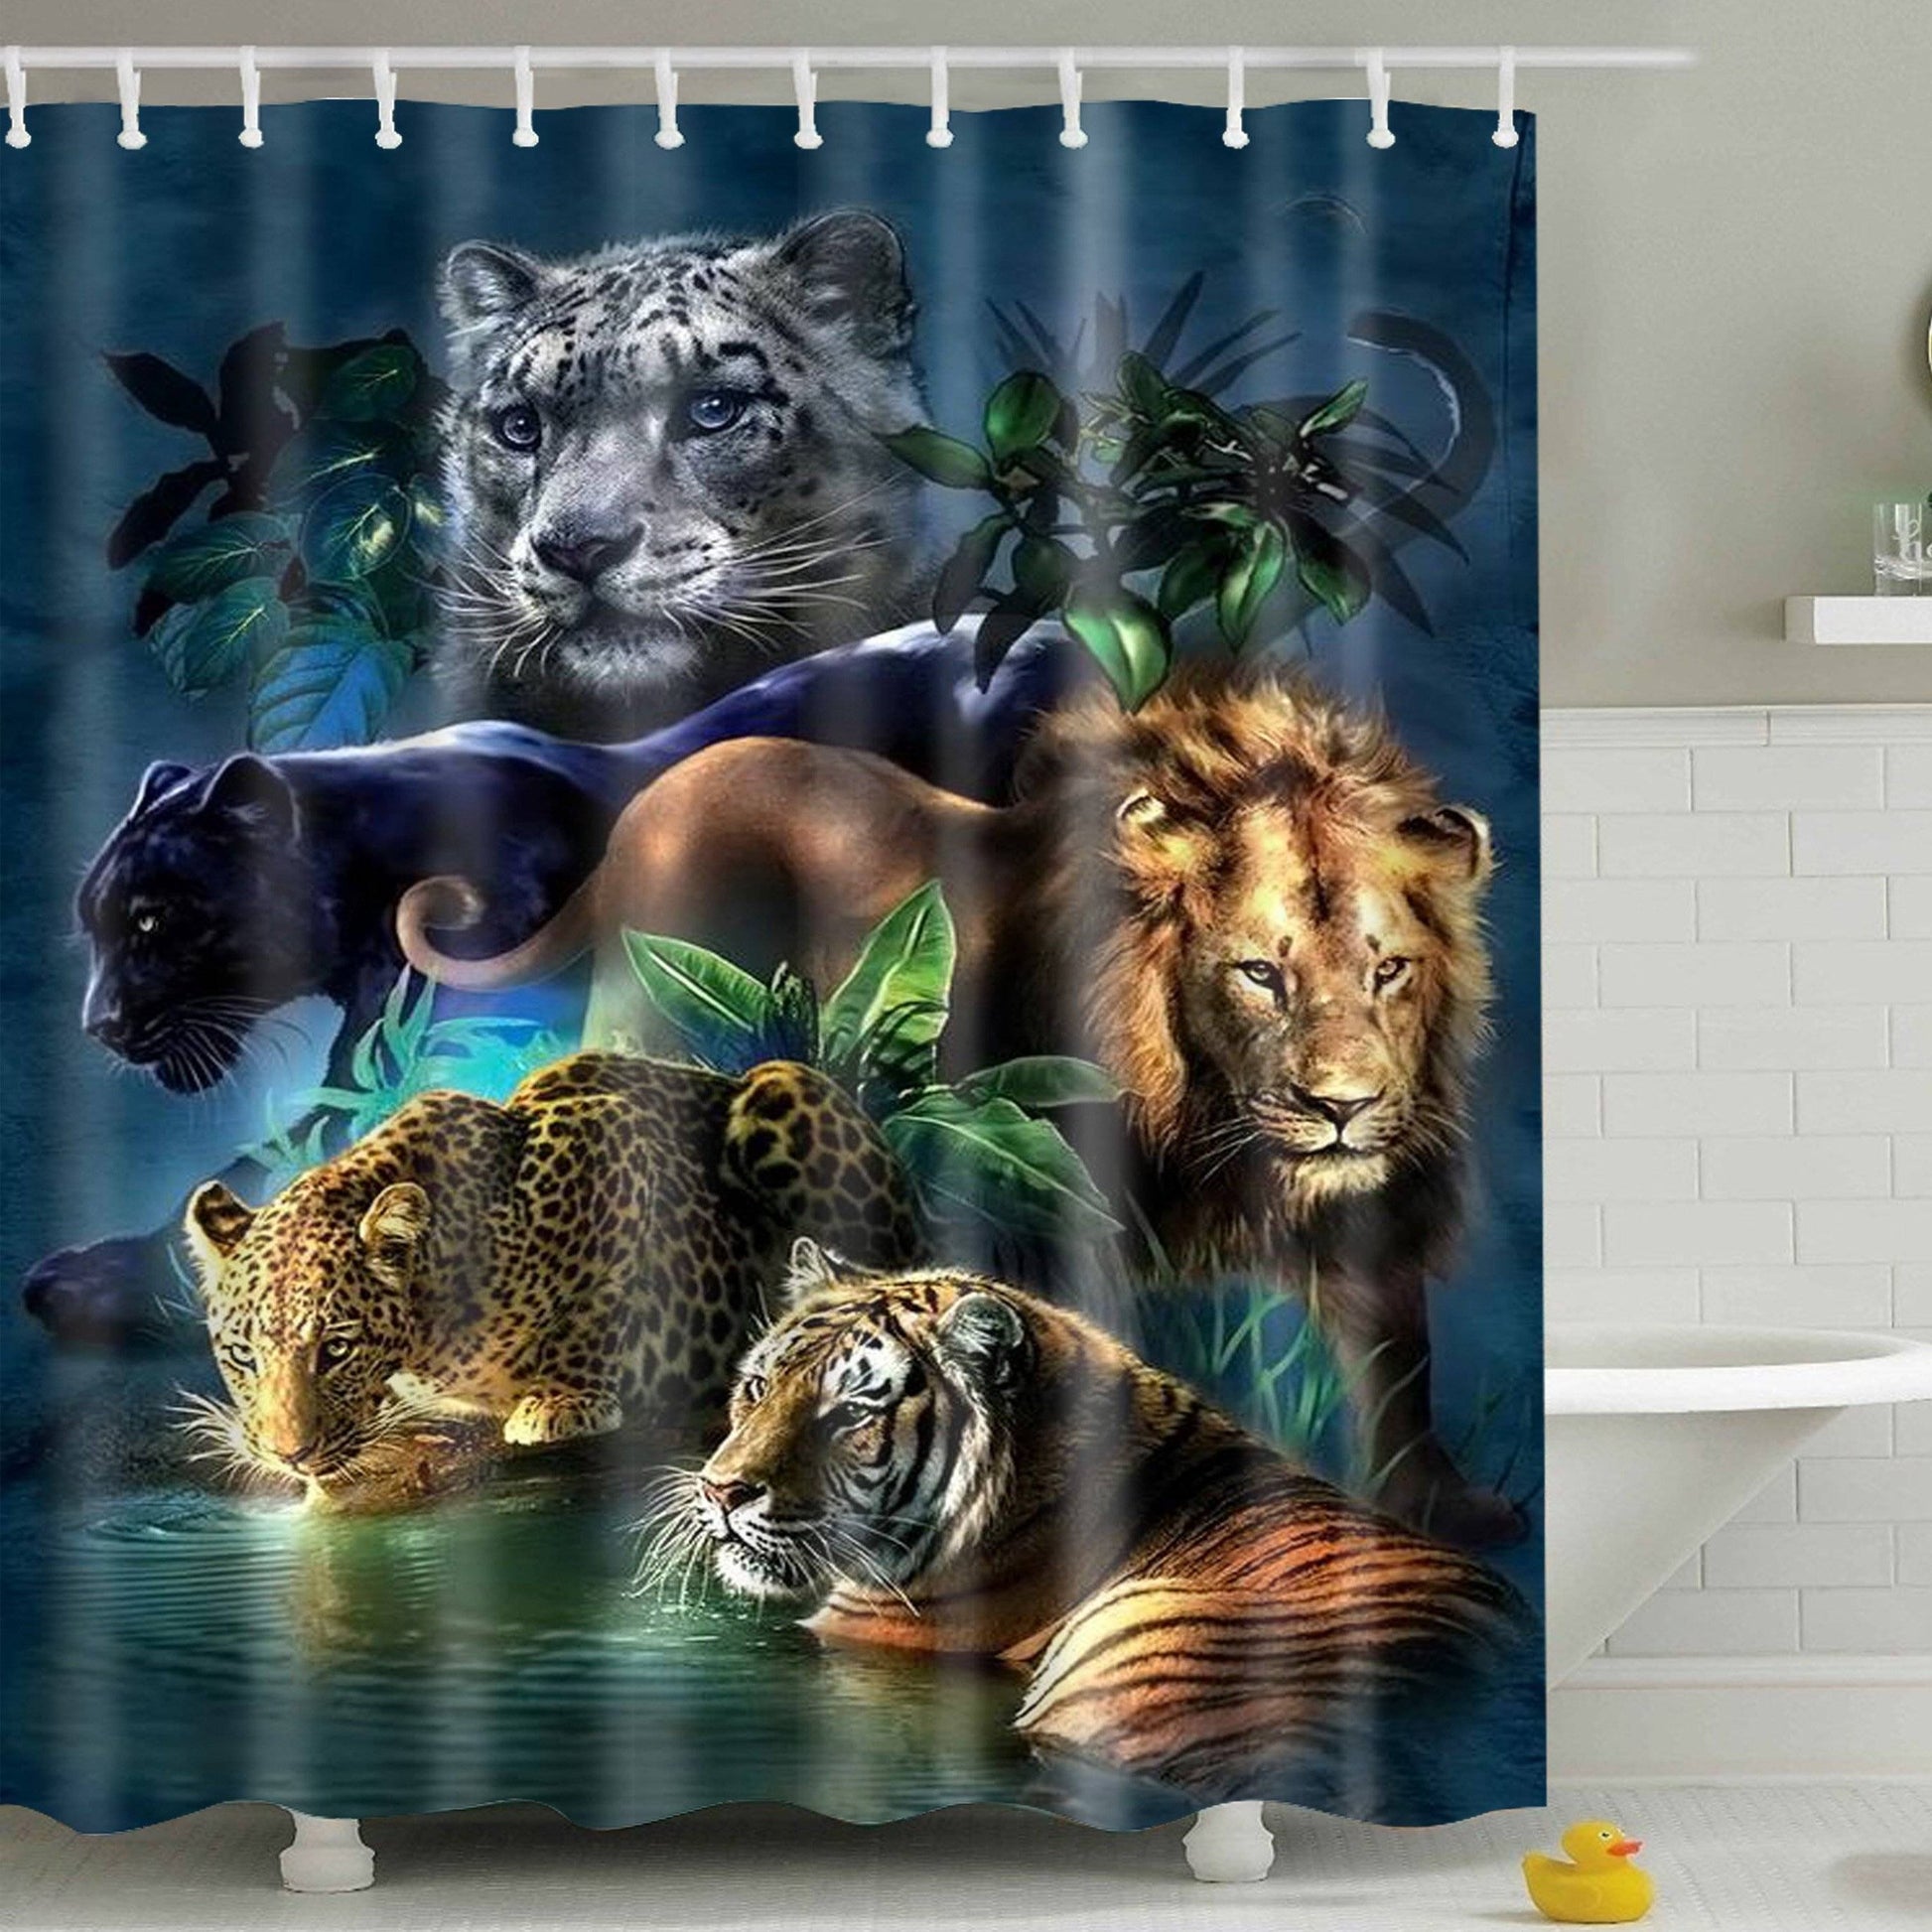 Jungle Big Cats Together Wildlife Animal Shower Curtain